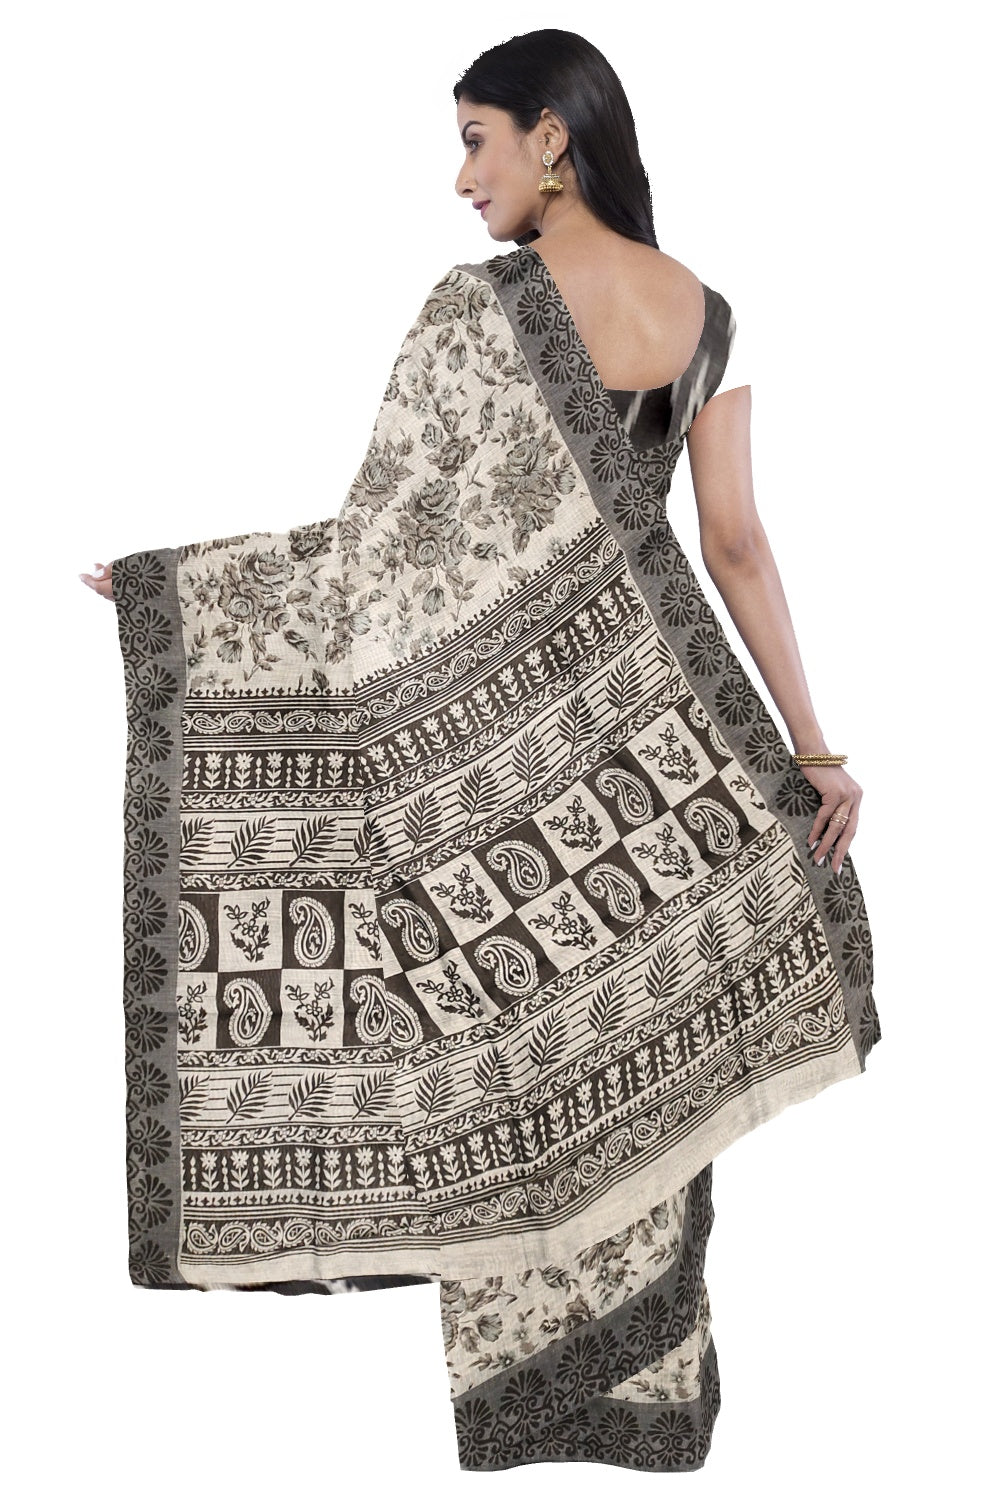 Southloom Pure Cotton White and Black Floral Designer Saree